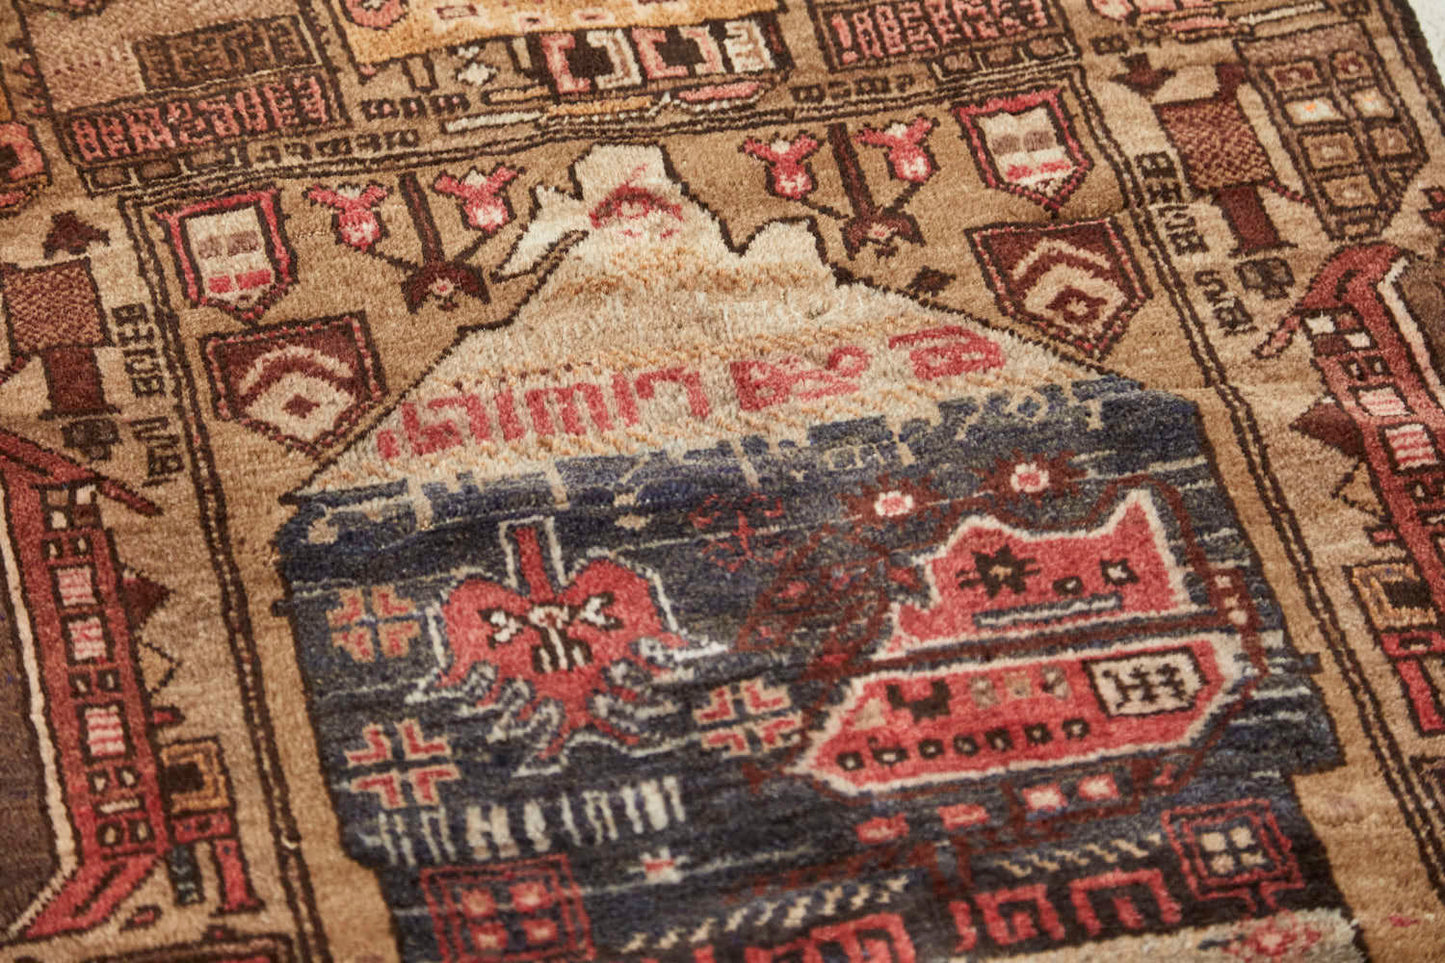 Vintage Afghan War Rug with earthy tones, tan base with brown and pink designs, beautiful details for office, kitchen or living room rug - Available from King Kennedy Rugs Los Angeles